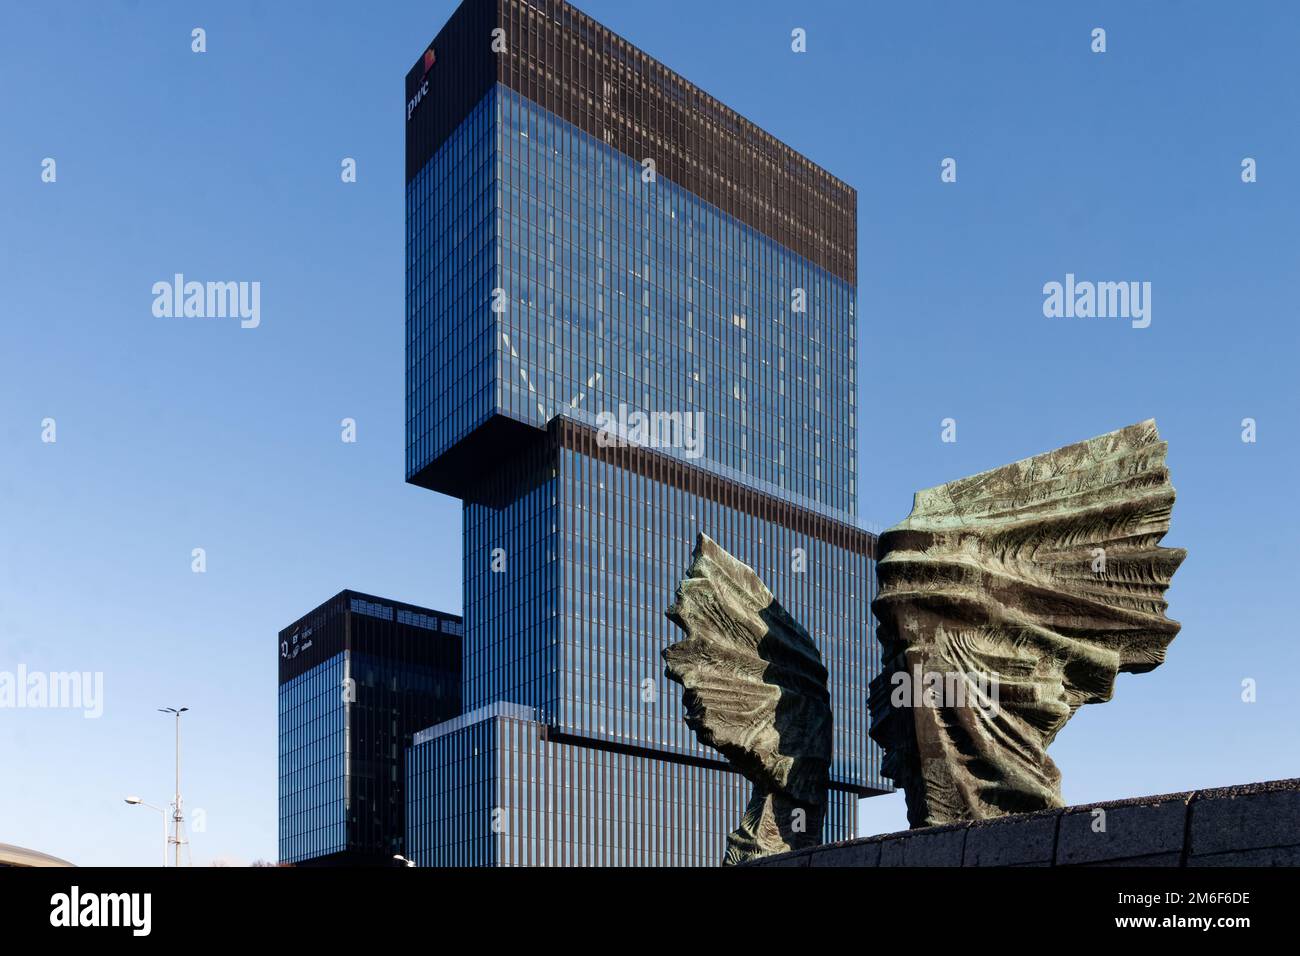 KTW office complex designed by Medusa Group (left), and the Silesian Uprisings memorial (wings, right) by sculptor Gustaw Zemla. Stock Photo